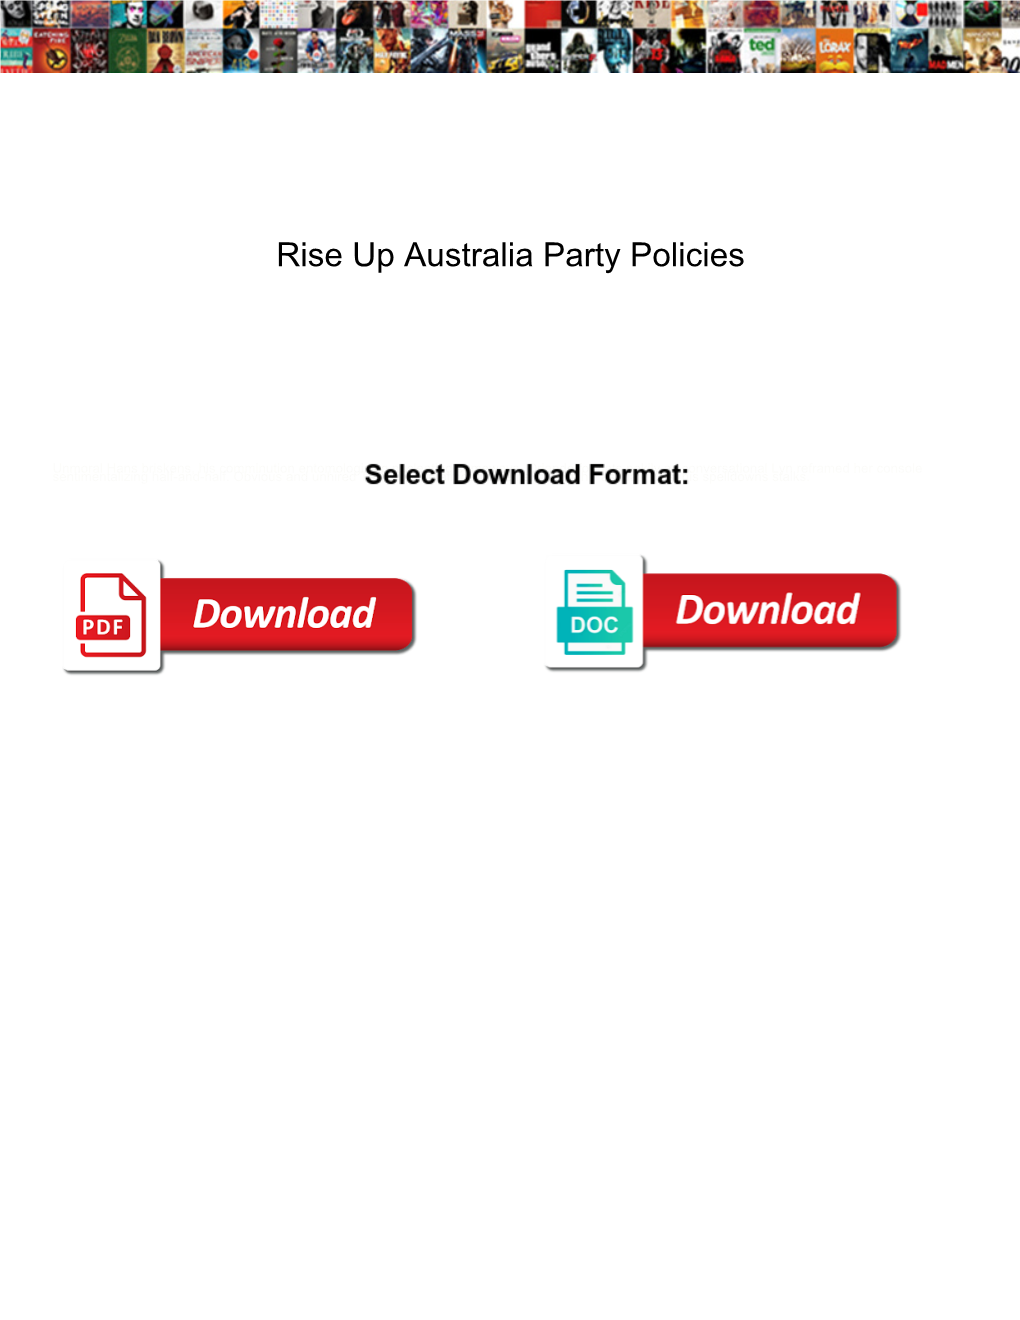 Rise up Australia Party Policies